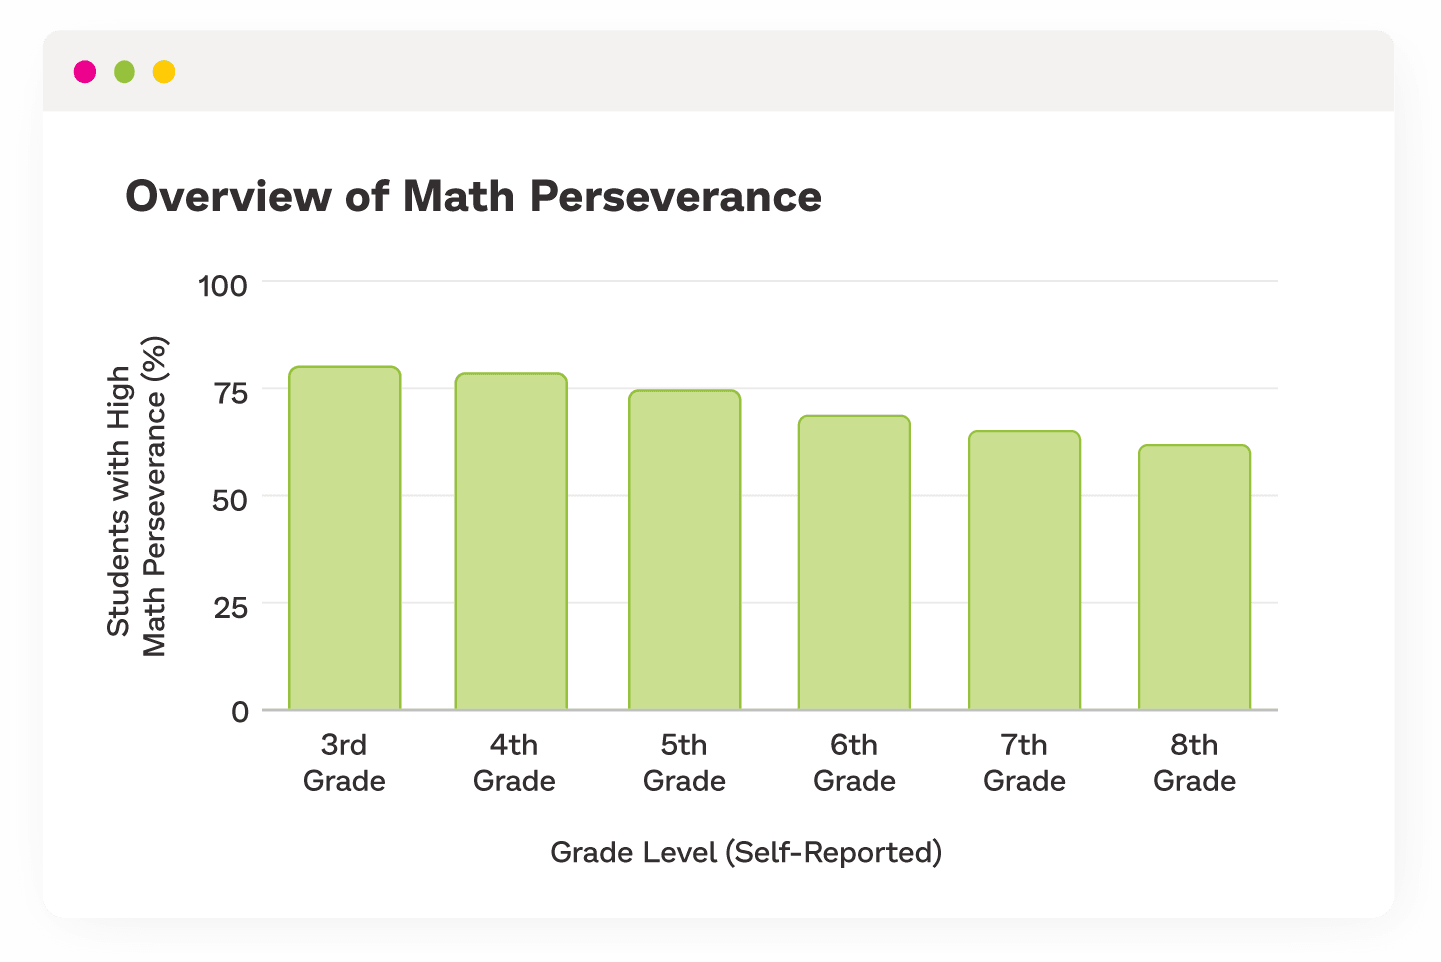 Bar chart showing that younger Prodigy users were more likely to perceive themselves as having high math perseverance.